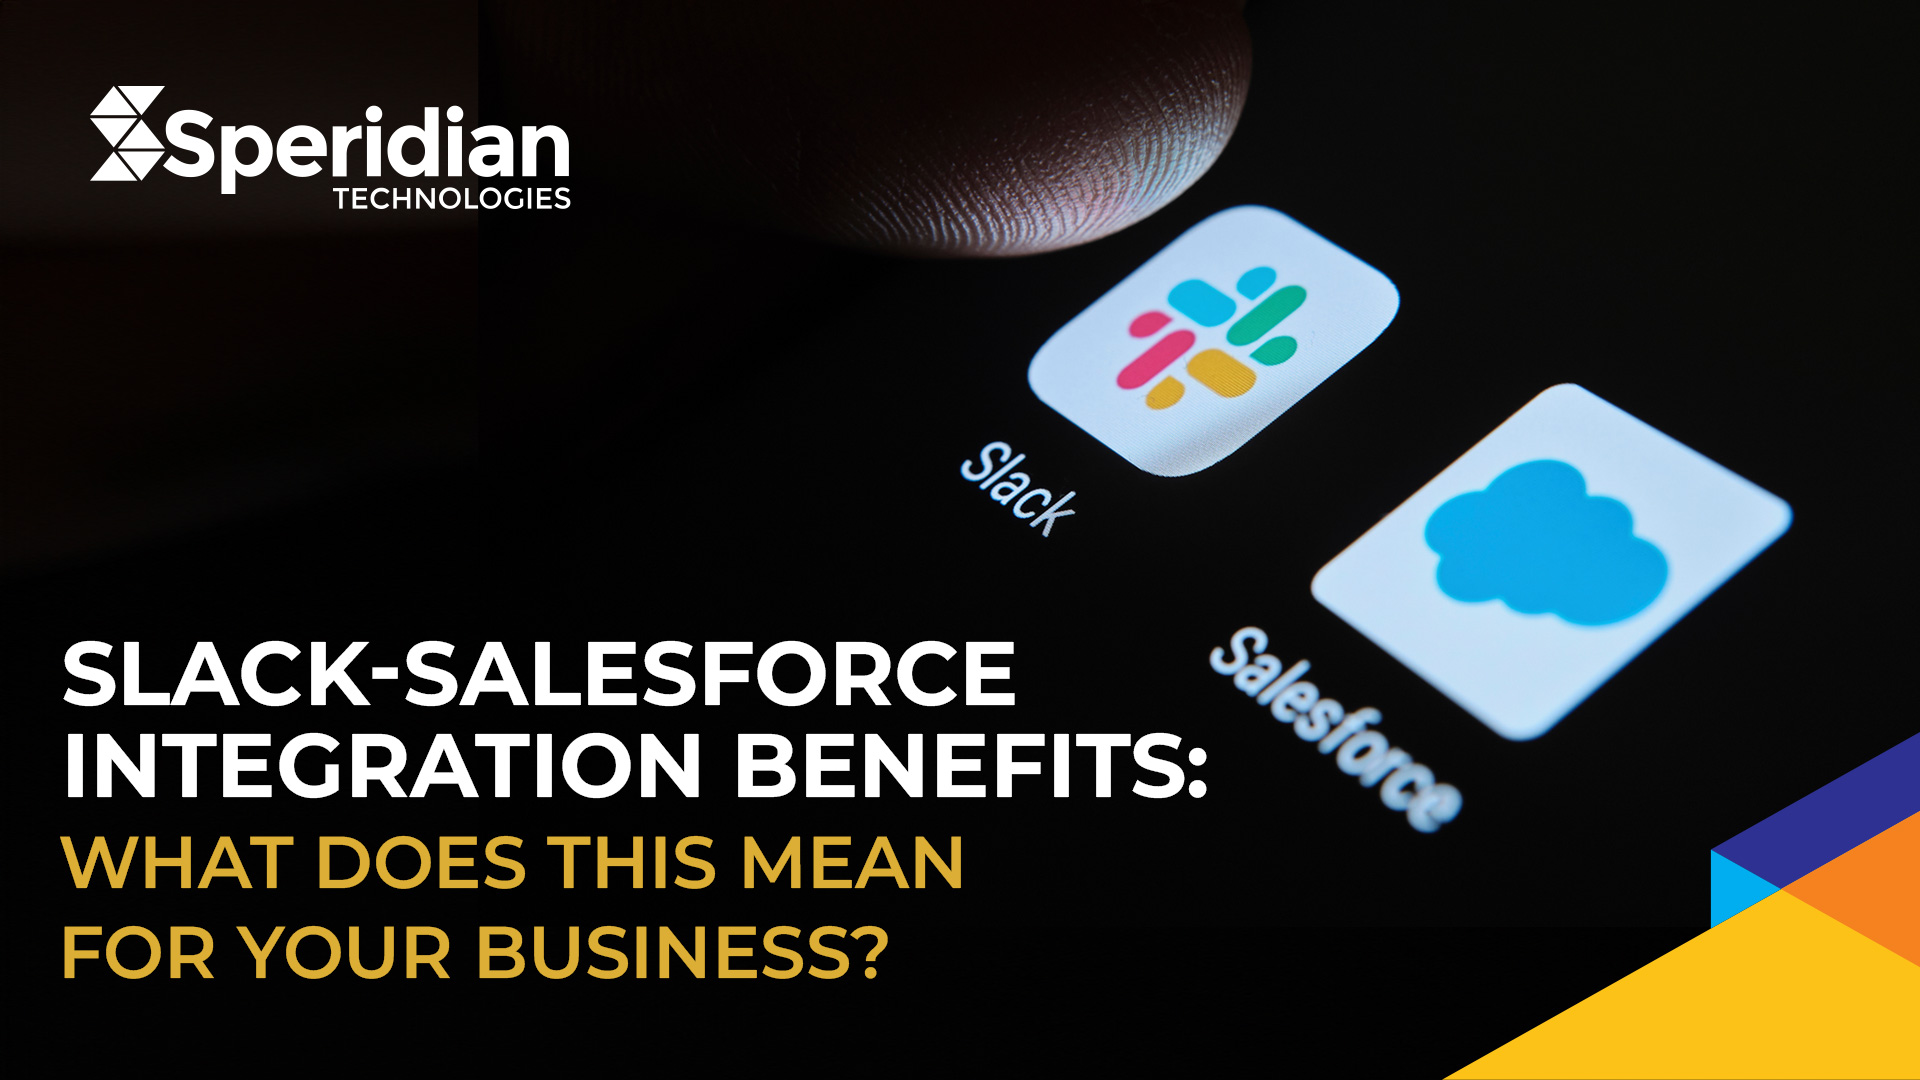 Slack-Salesforce Integration Benefits: What does this mean for your business?